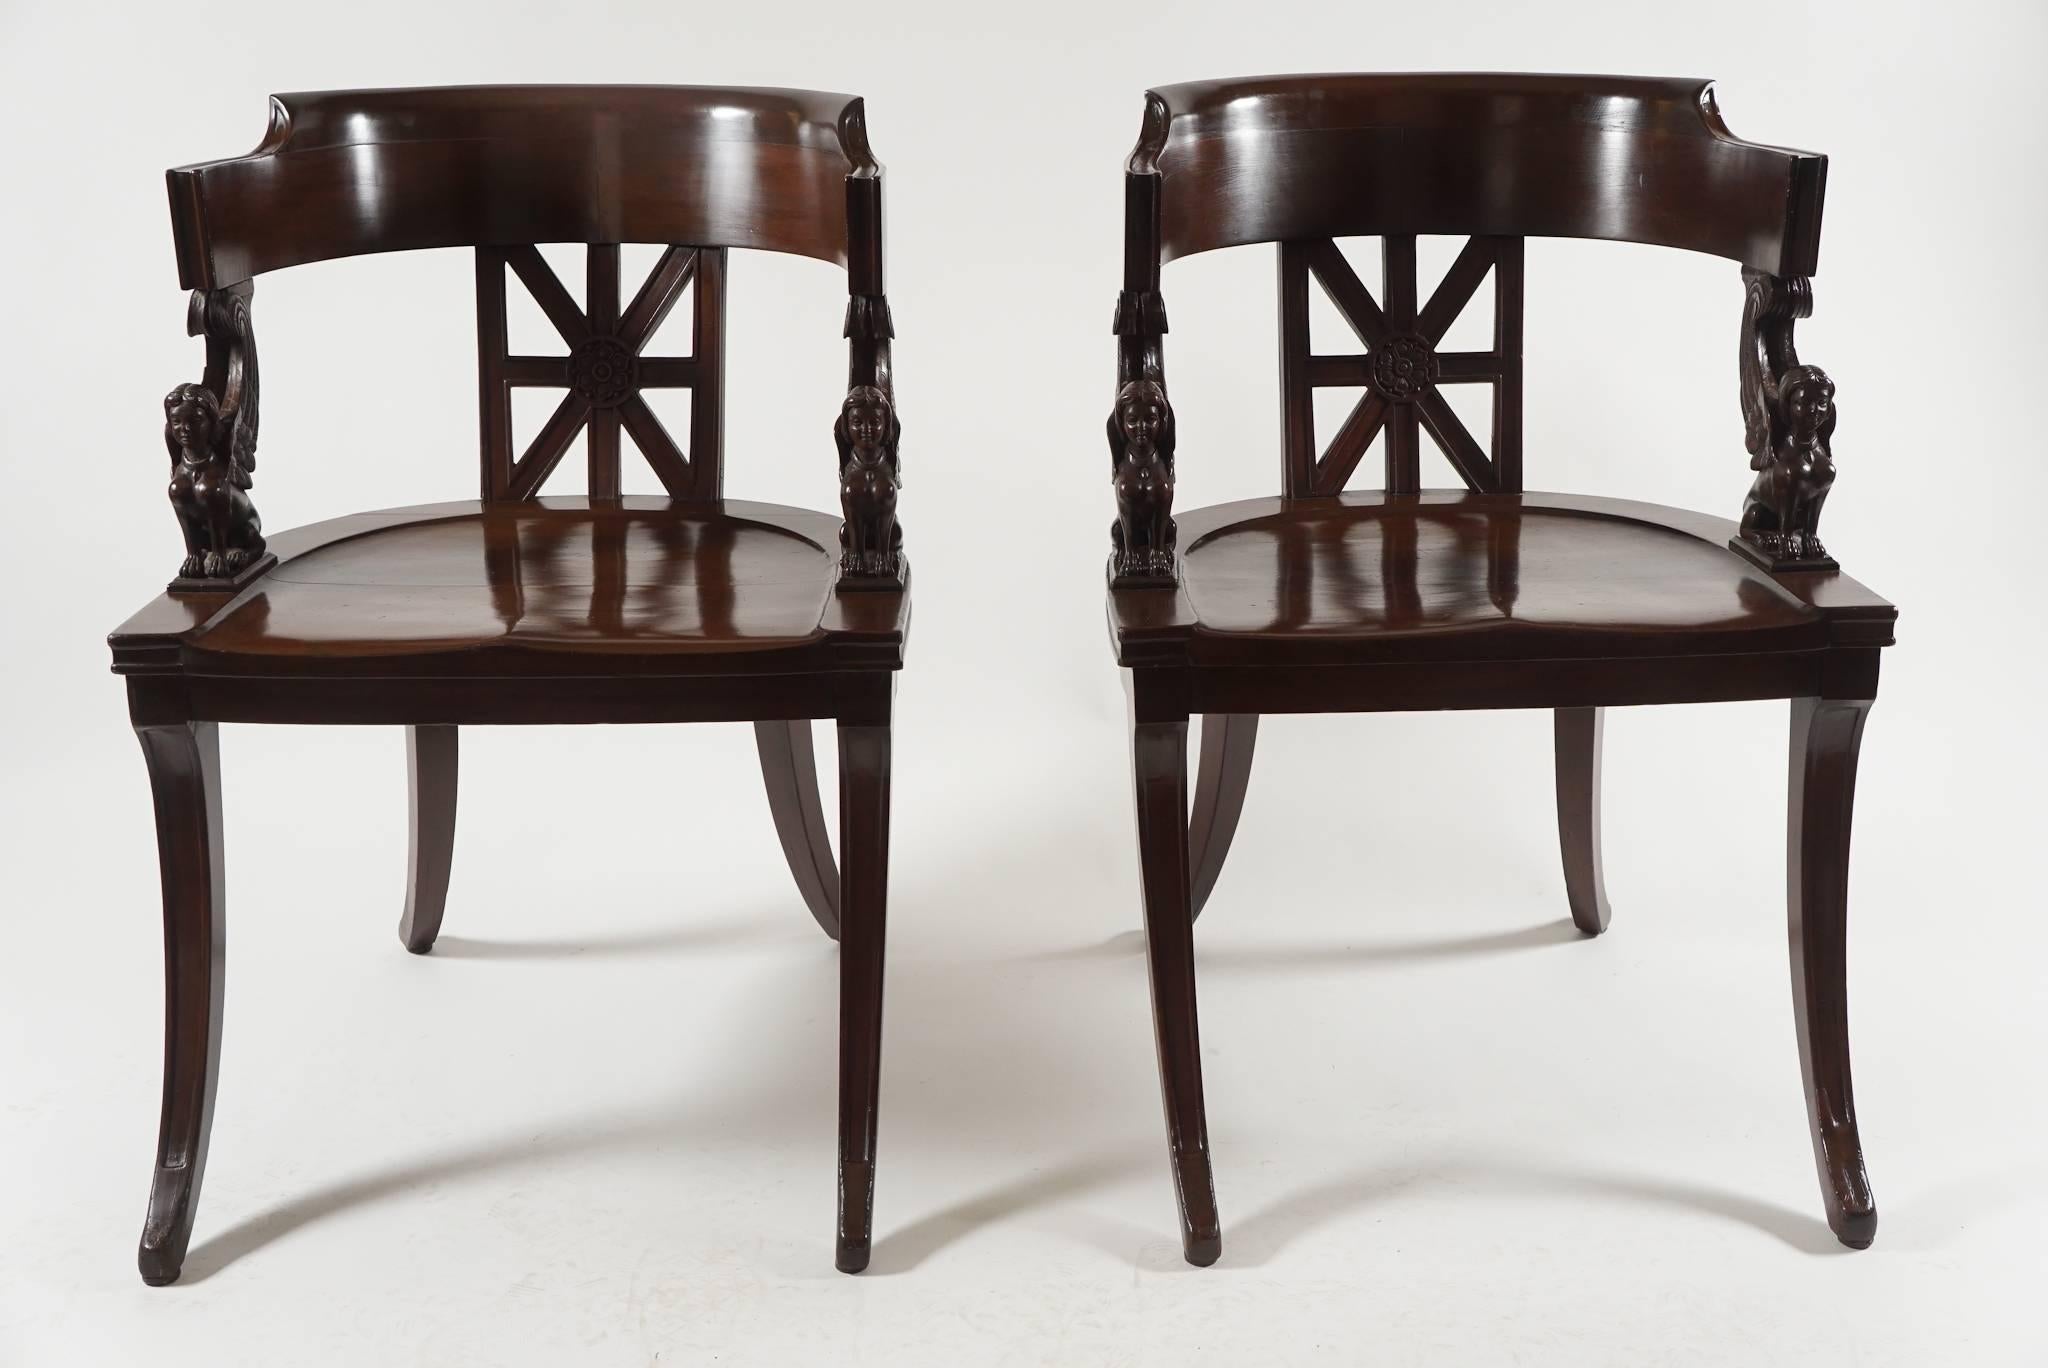 Extremely elegant pair of French, circa 1890, neoclassical style klismos form chairs of solid mahogany construction having deeply bowed continuous crest-rails supported by geometric pierced back-splats with central carved rosettes and carved female